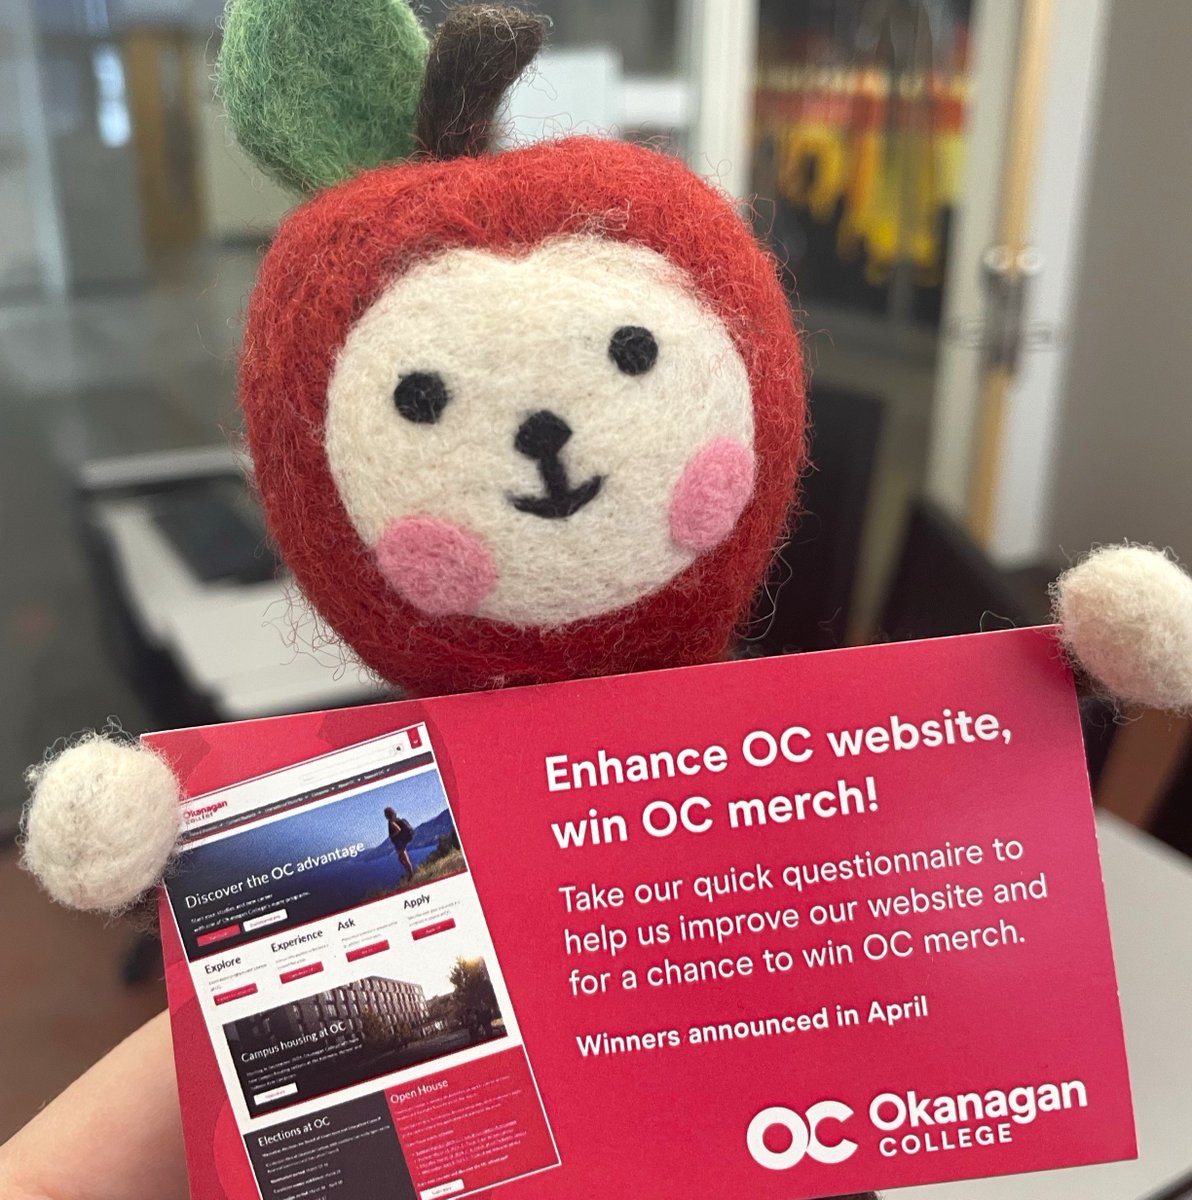 Ringo would like to invite you to give your feedback on the OC website for a chance to win some fantastic OC merch! 🍎💻 Complete the survey here: surveymonkey.com/r/OkanaganQues…